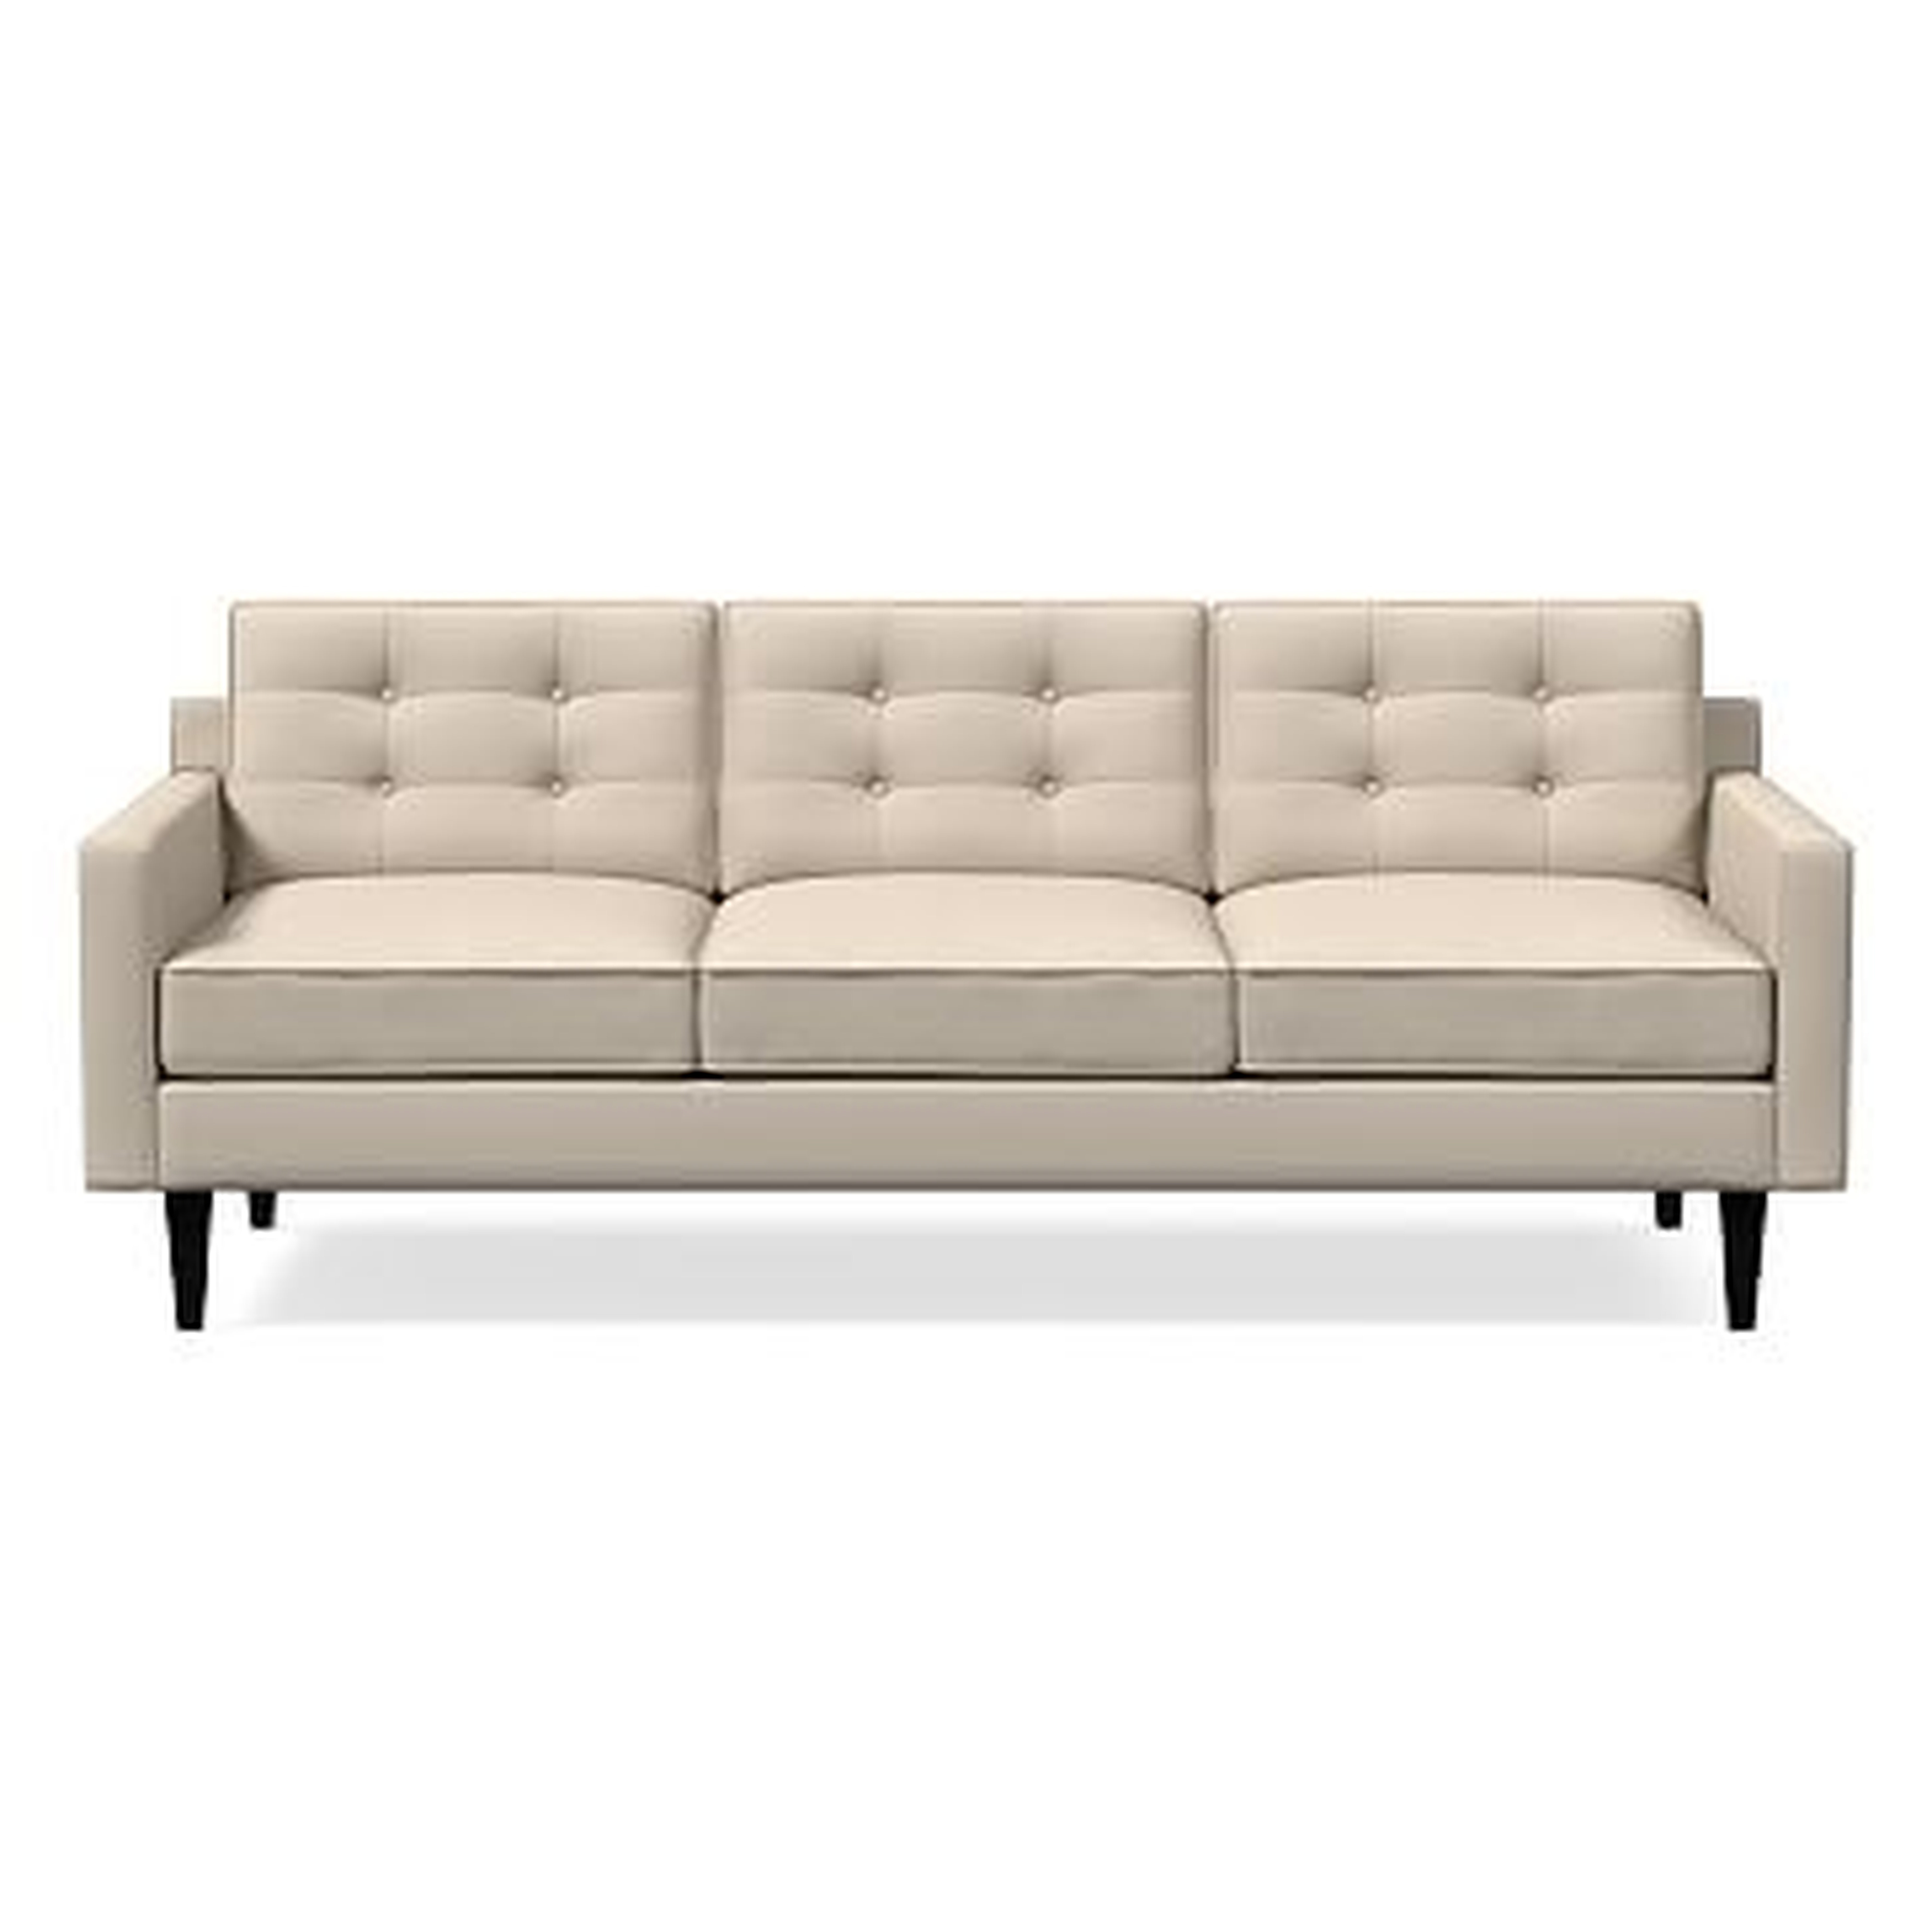 Drake Midcentury 86" Sofa, Poly, Performance Washed Canvas, Natural, Chocolate - West Elm